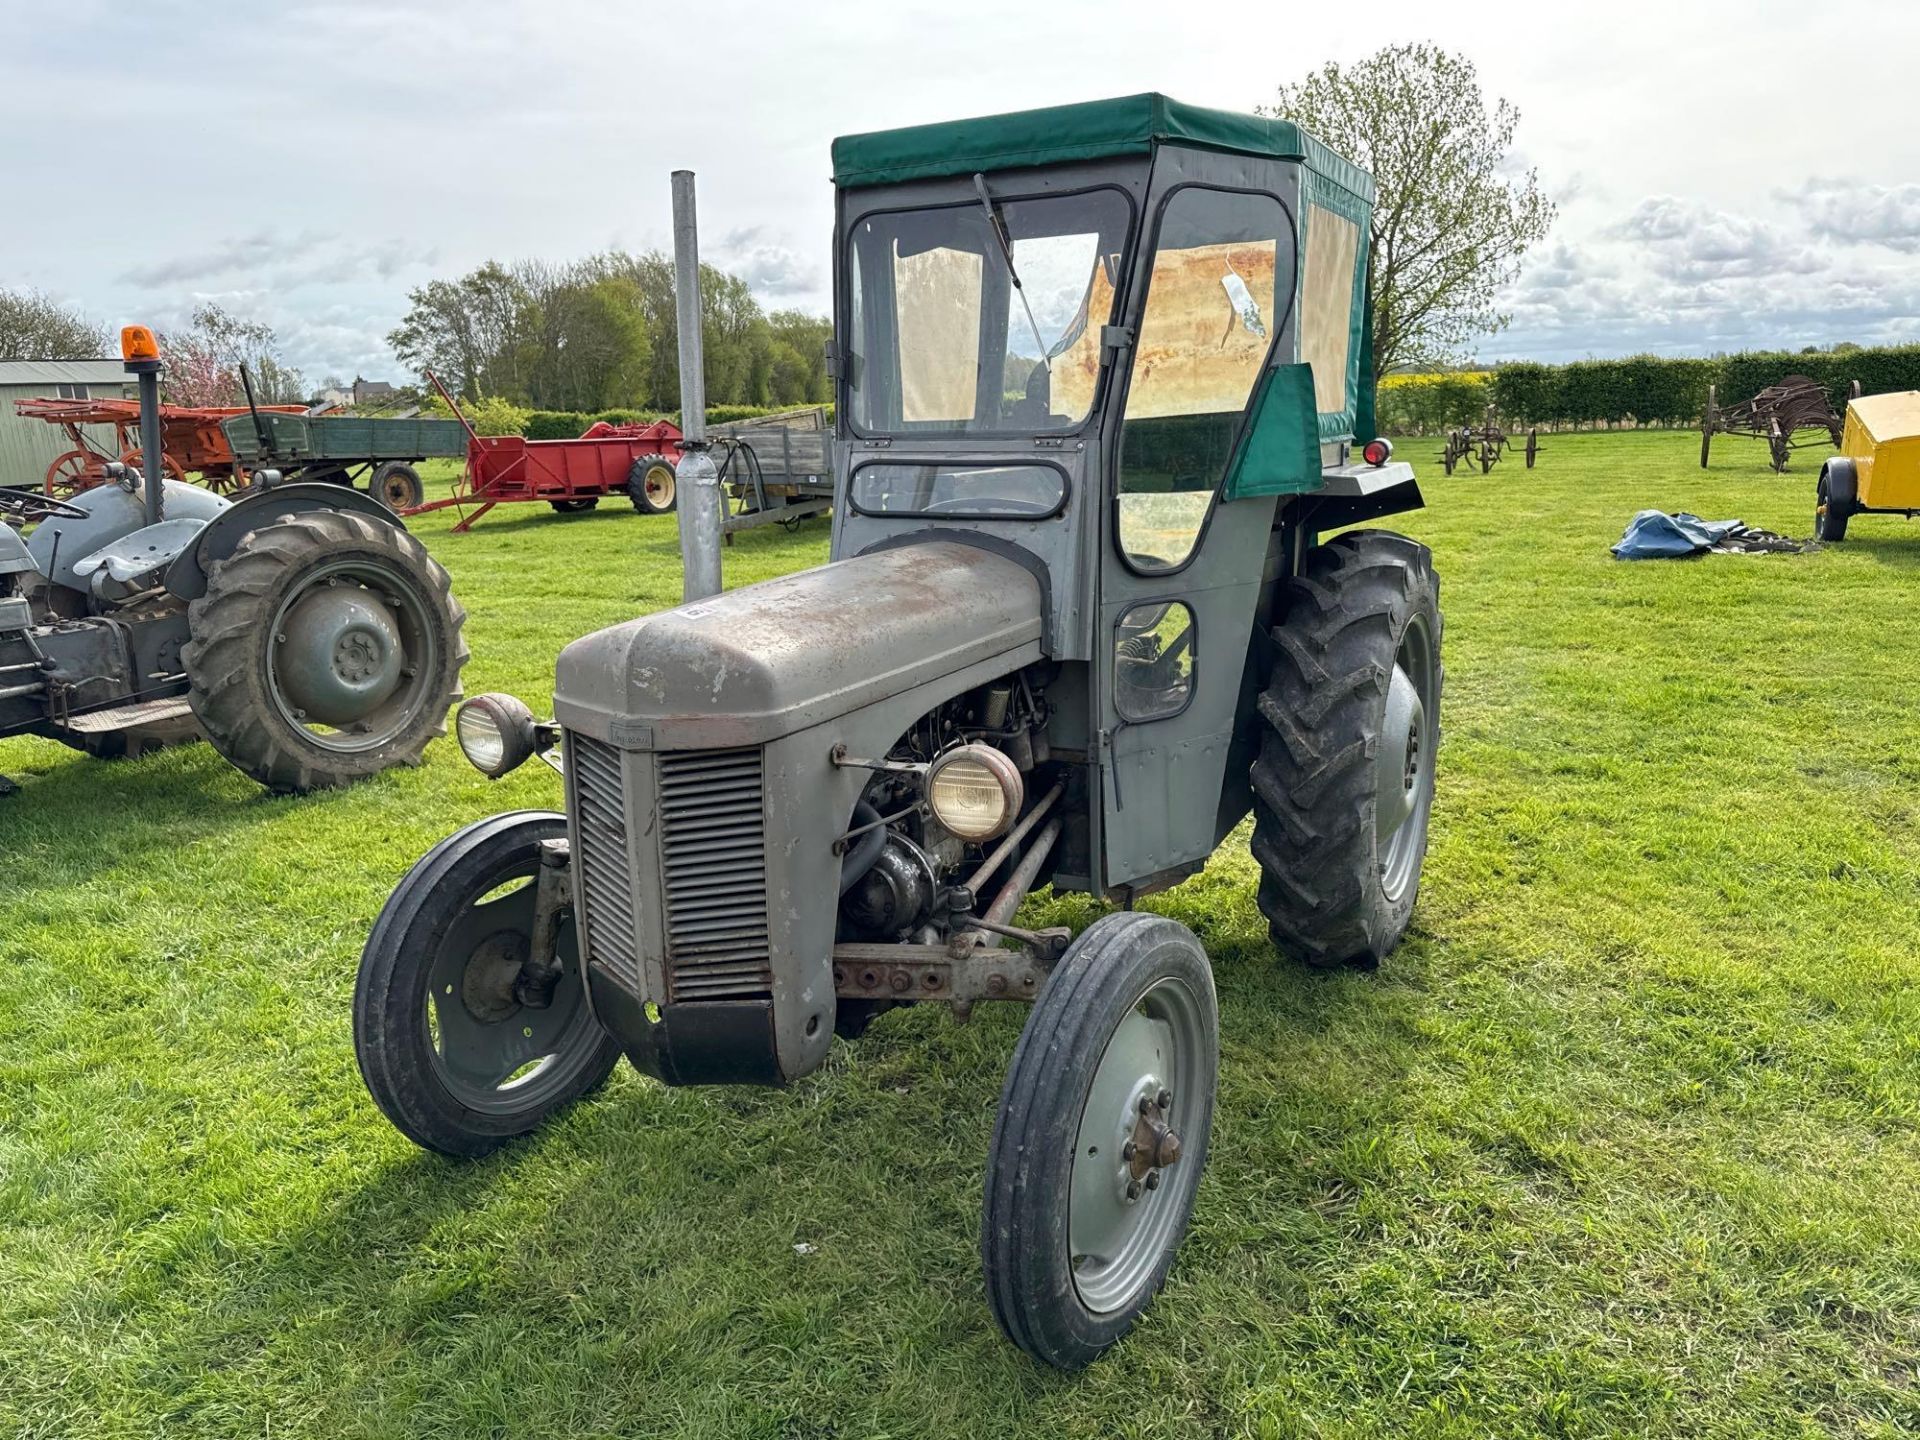 1954 Ferguson TEF 2wd diesel tractor with canvas cab, pick up hitch and rear linkage on 11.2-28 rear